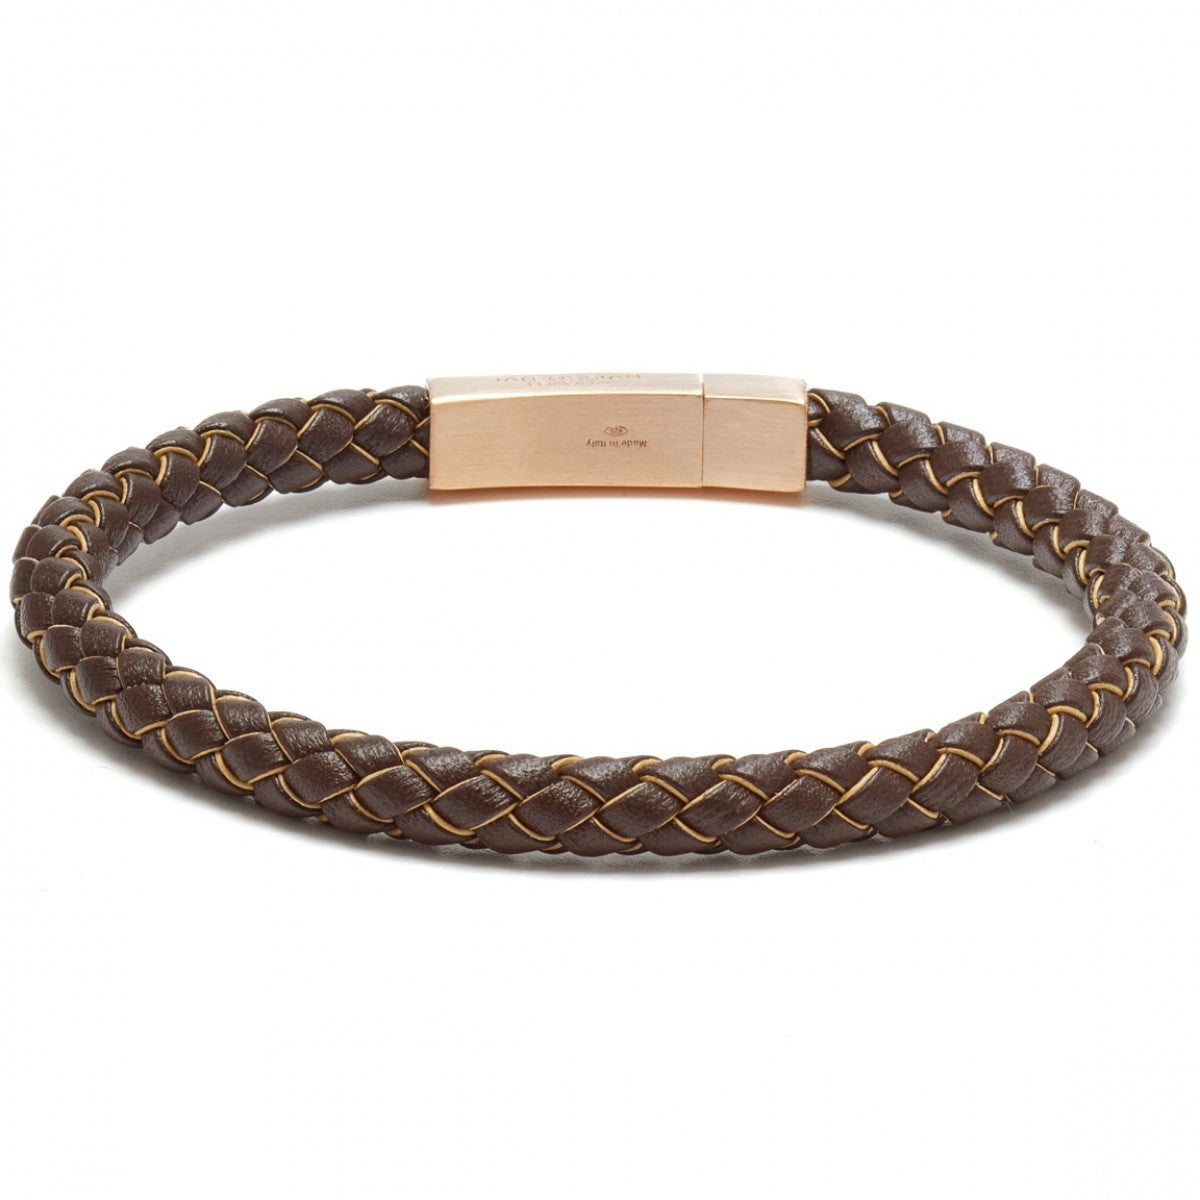 Tateossian Click Tocco Leather with Edge in Metallic Bracelet, Brown